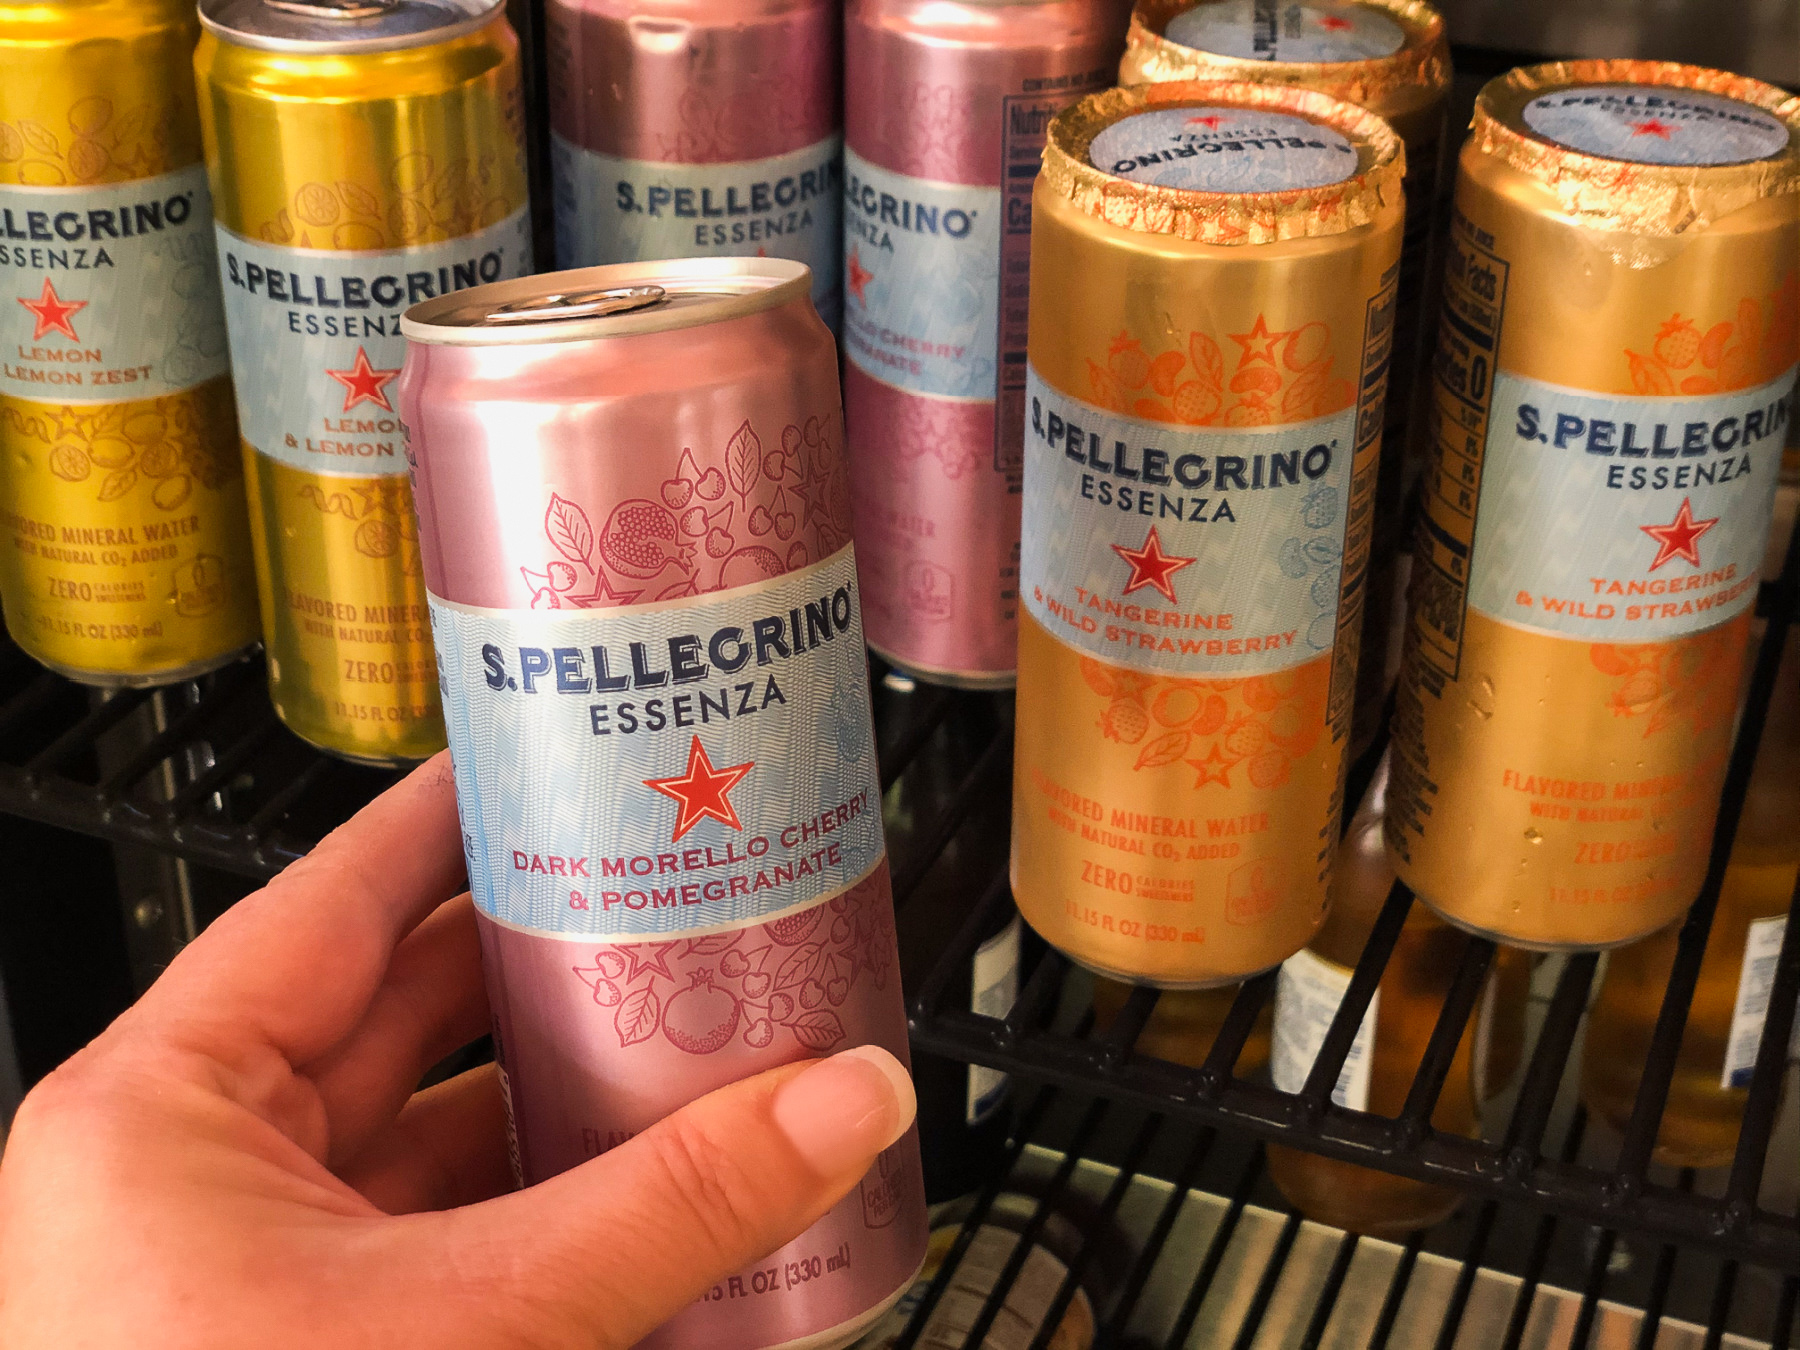 Elevate Your Meal With The Great Taste Of S.Pellegrino Essenza on I Heart Publix 2